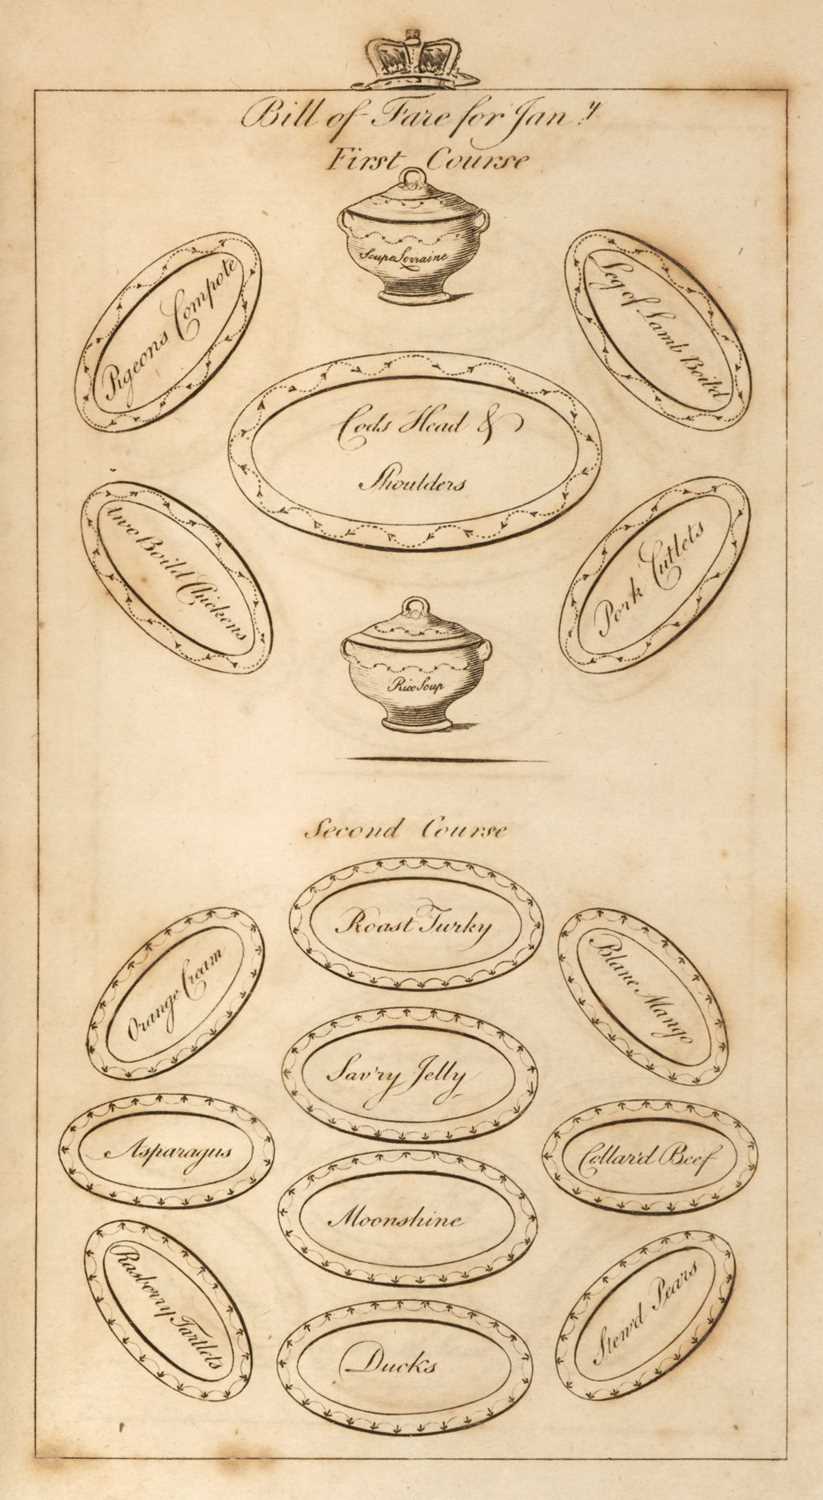 Lot 358 - Collingwood (Francis & Woollams, John). The Universal Cook, 3rd edition, 1801